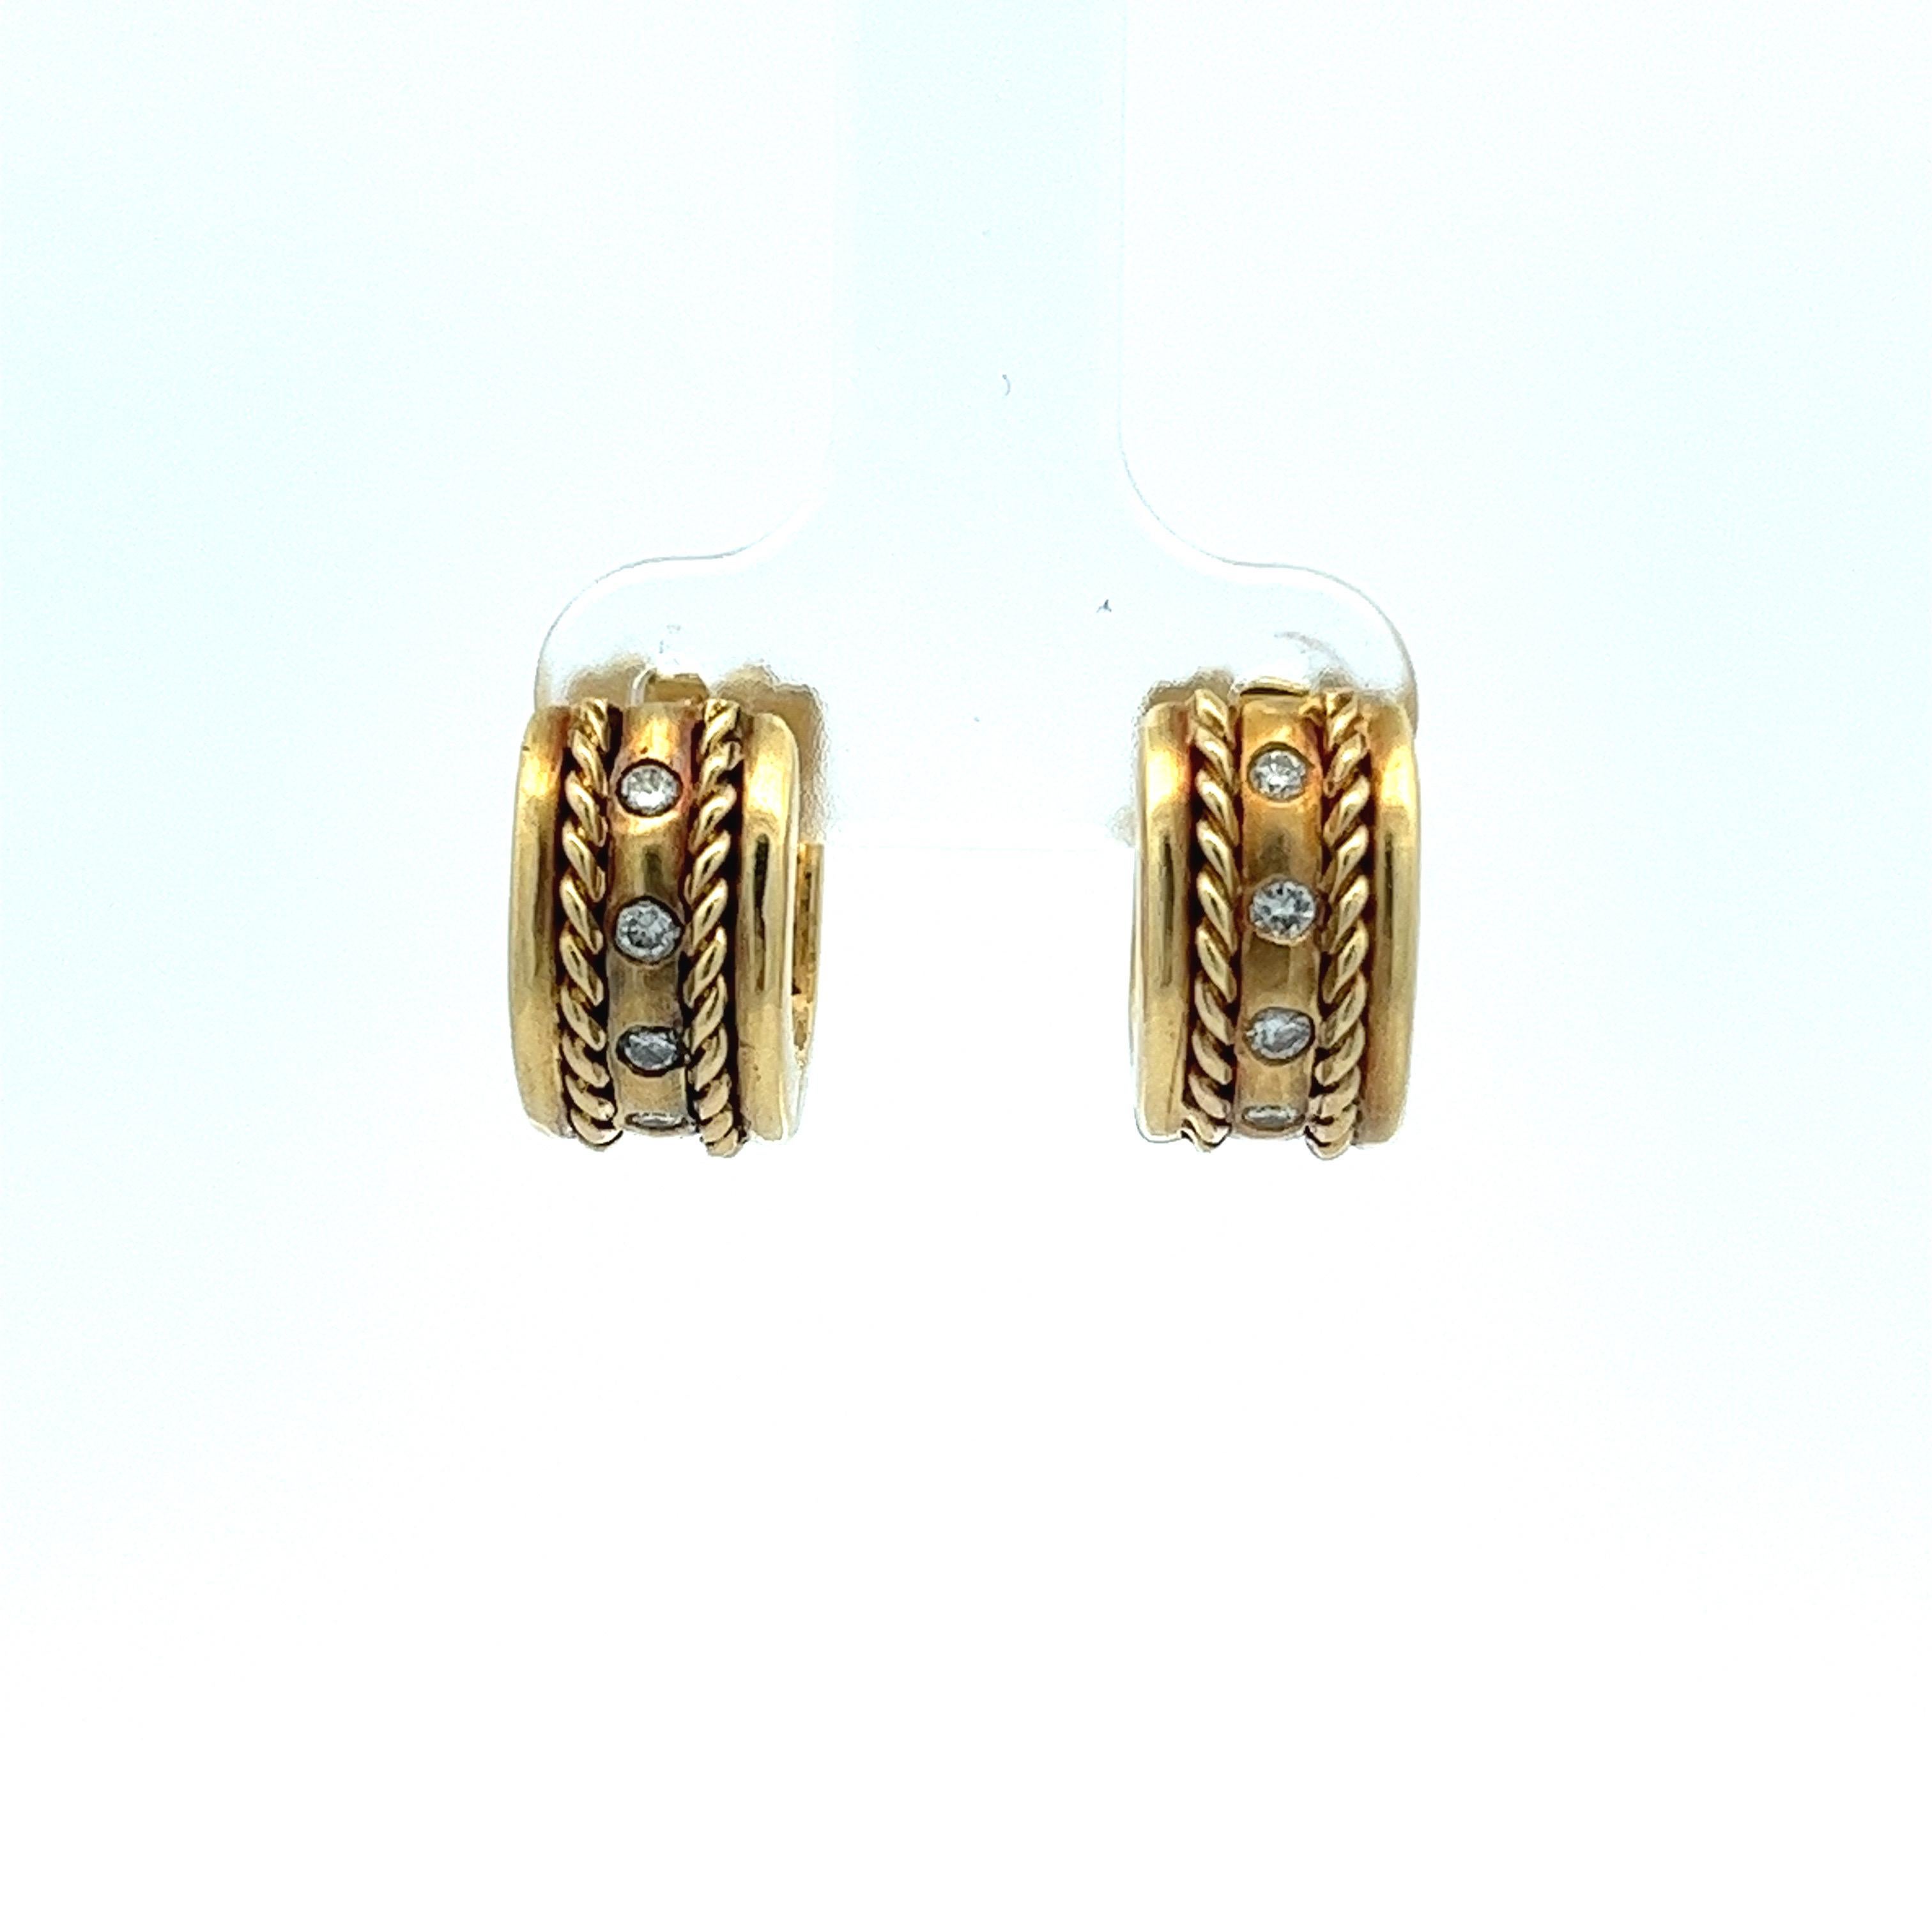 H. Stern's signature hoop huggie earrings are expertly crafted from 18-karat yellow gold. Each earring boasts four diamonds, beautifully highlighted by a refined roped motif. They carry a combined weight of 0.15 carats. Distinctively, the interior